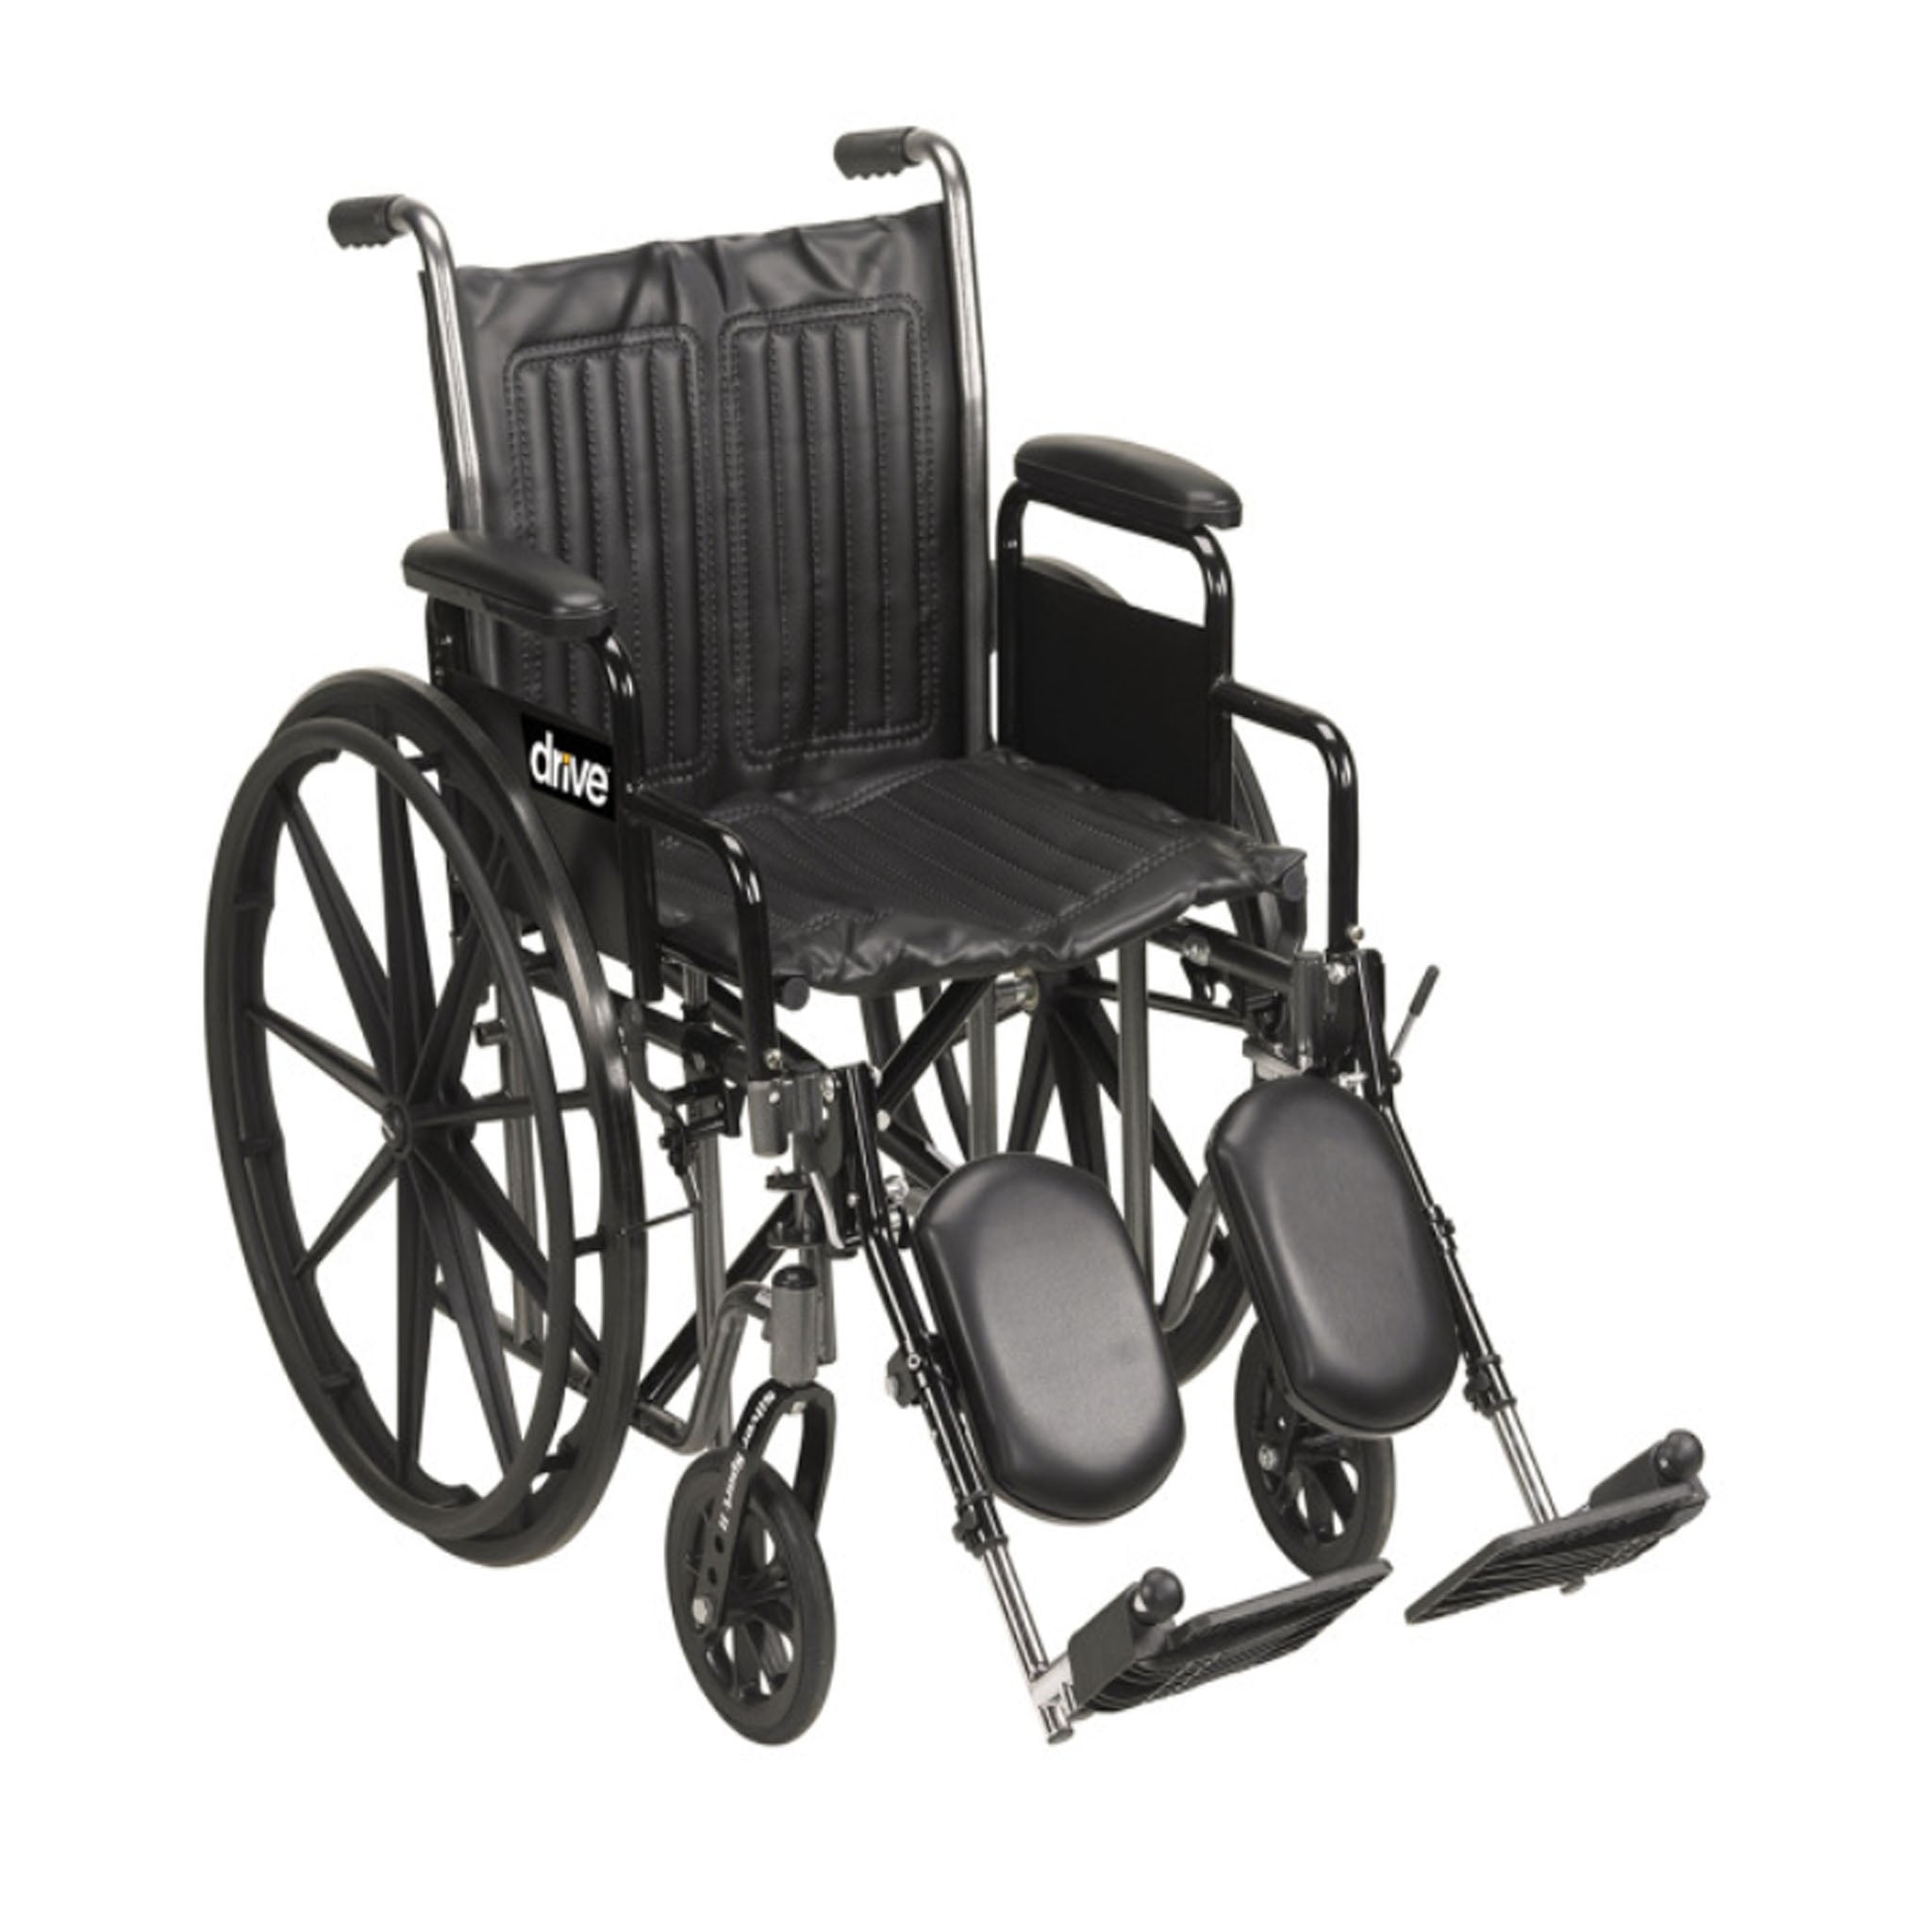 Silver Sport 2 Wheelchair by Drive